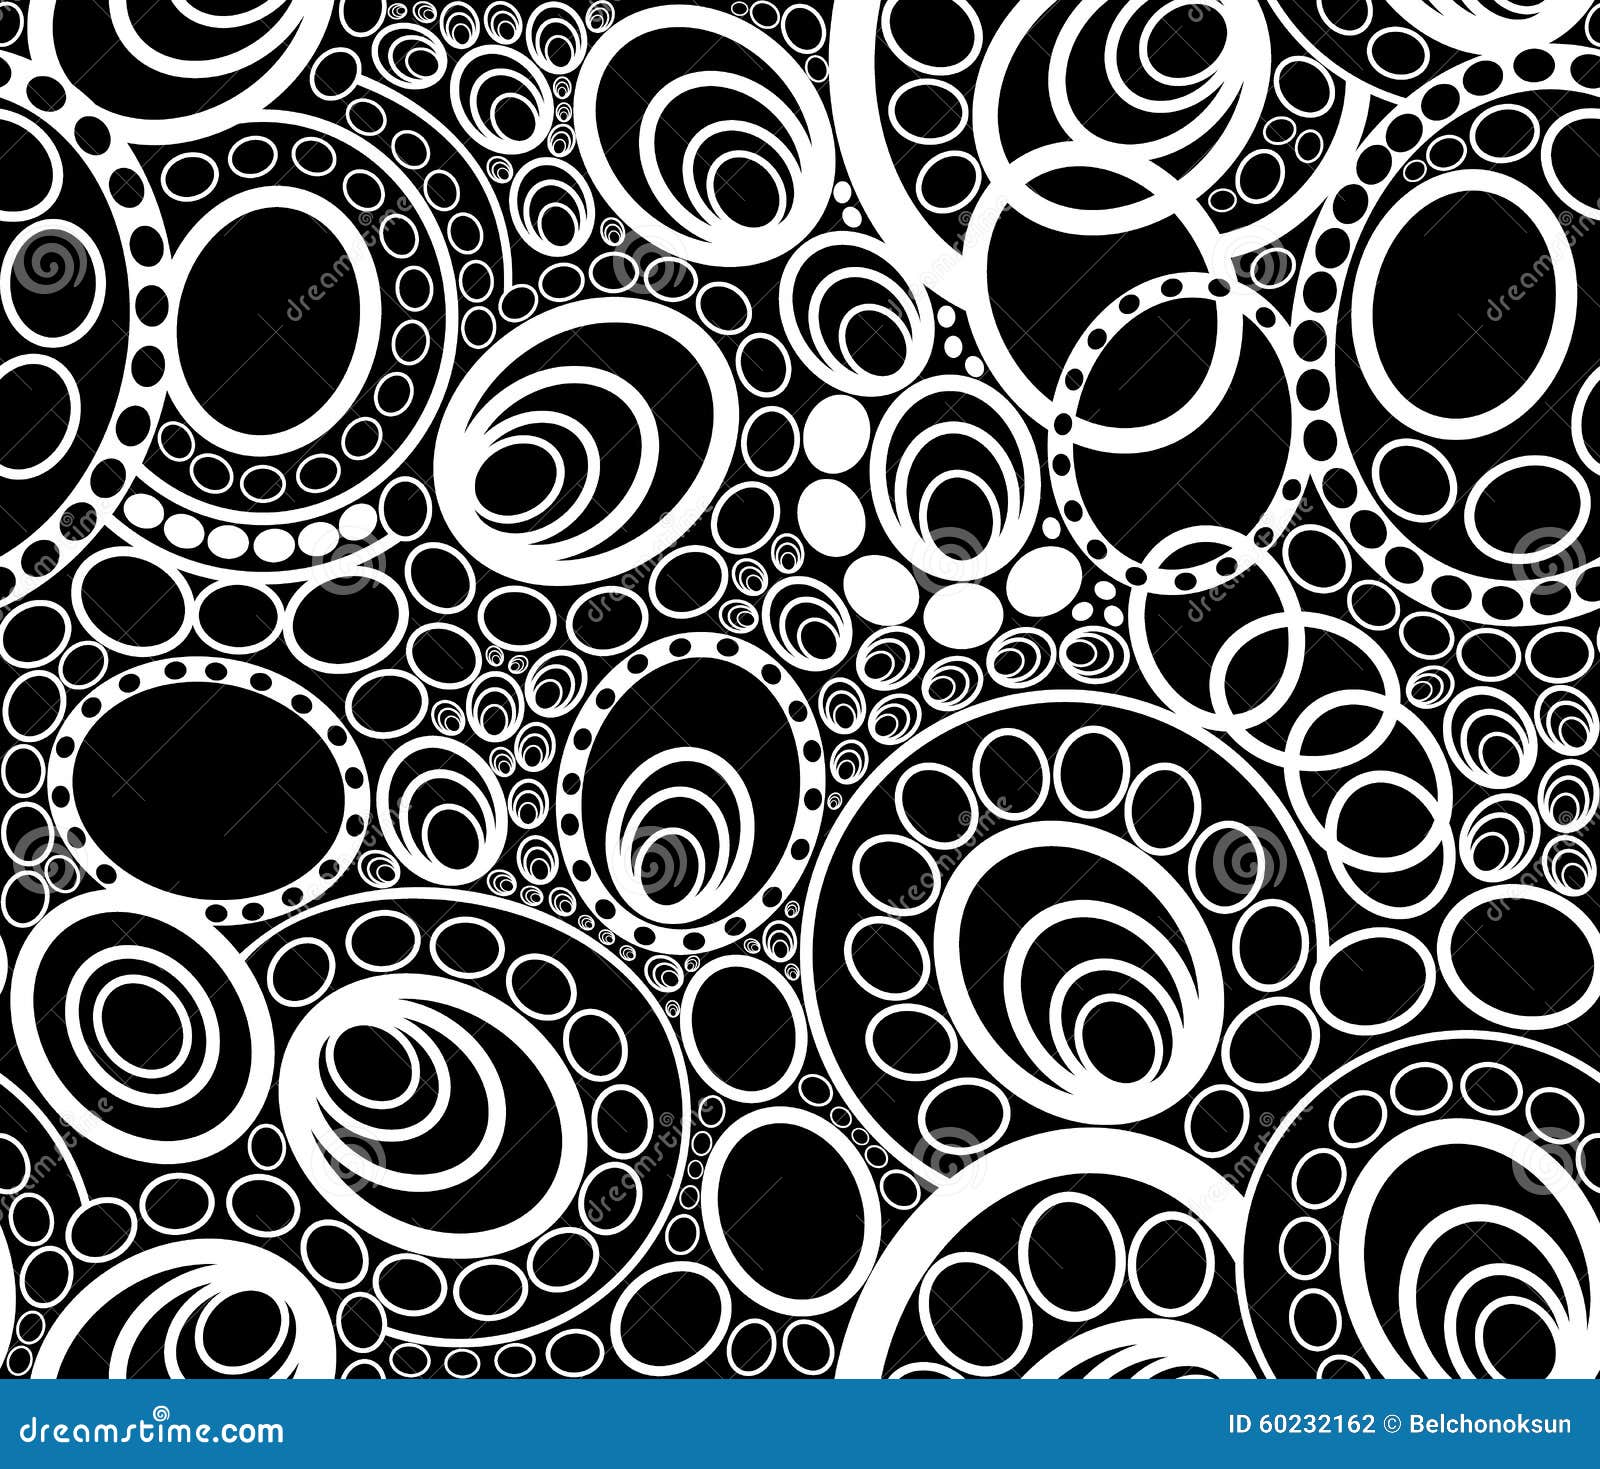 Abstract Vector Seamless Pattern with Circle Ornaments Stock Vector ...